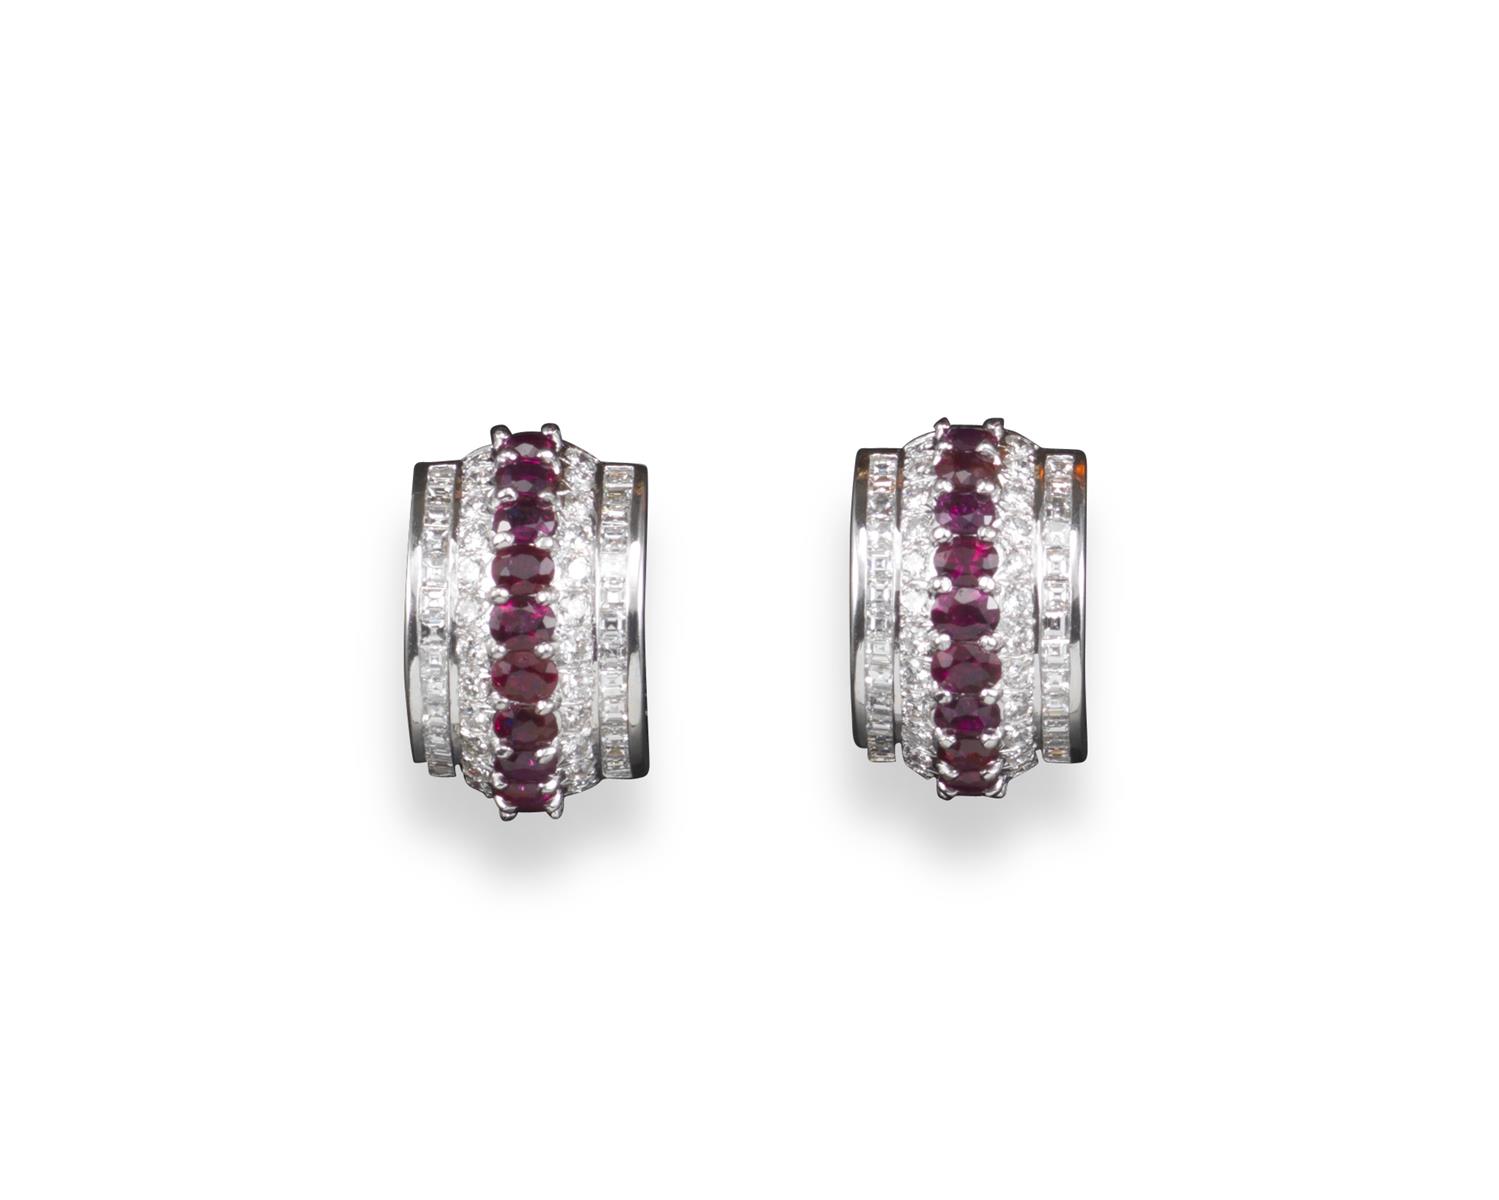 A pair of ruby and diamond crescent-shaped earrings, set with a centre line of oval-shaped rubies